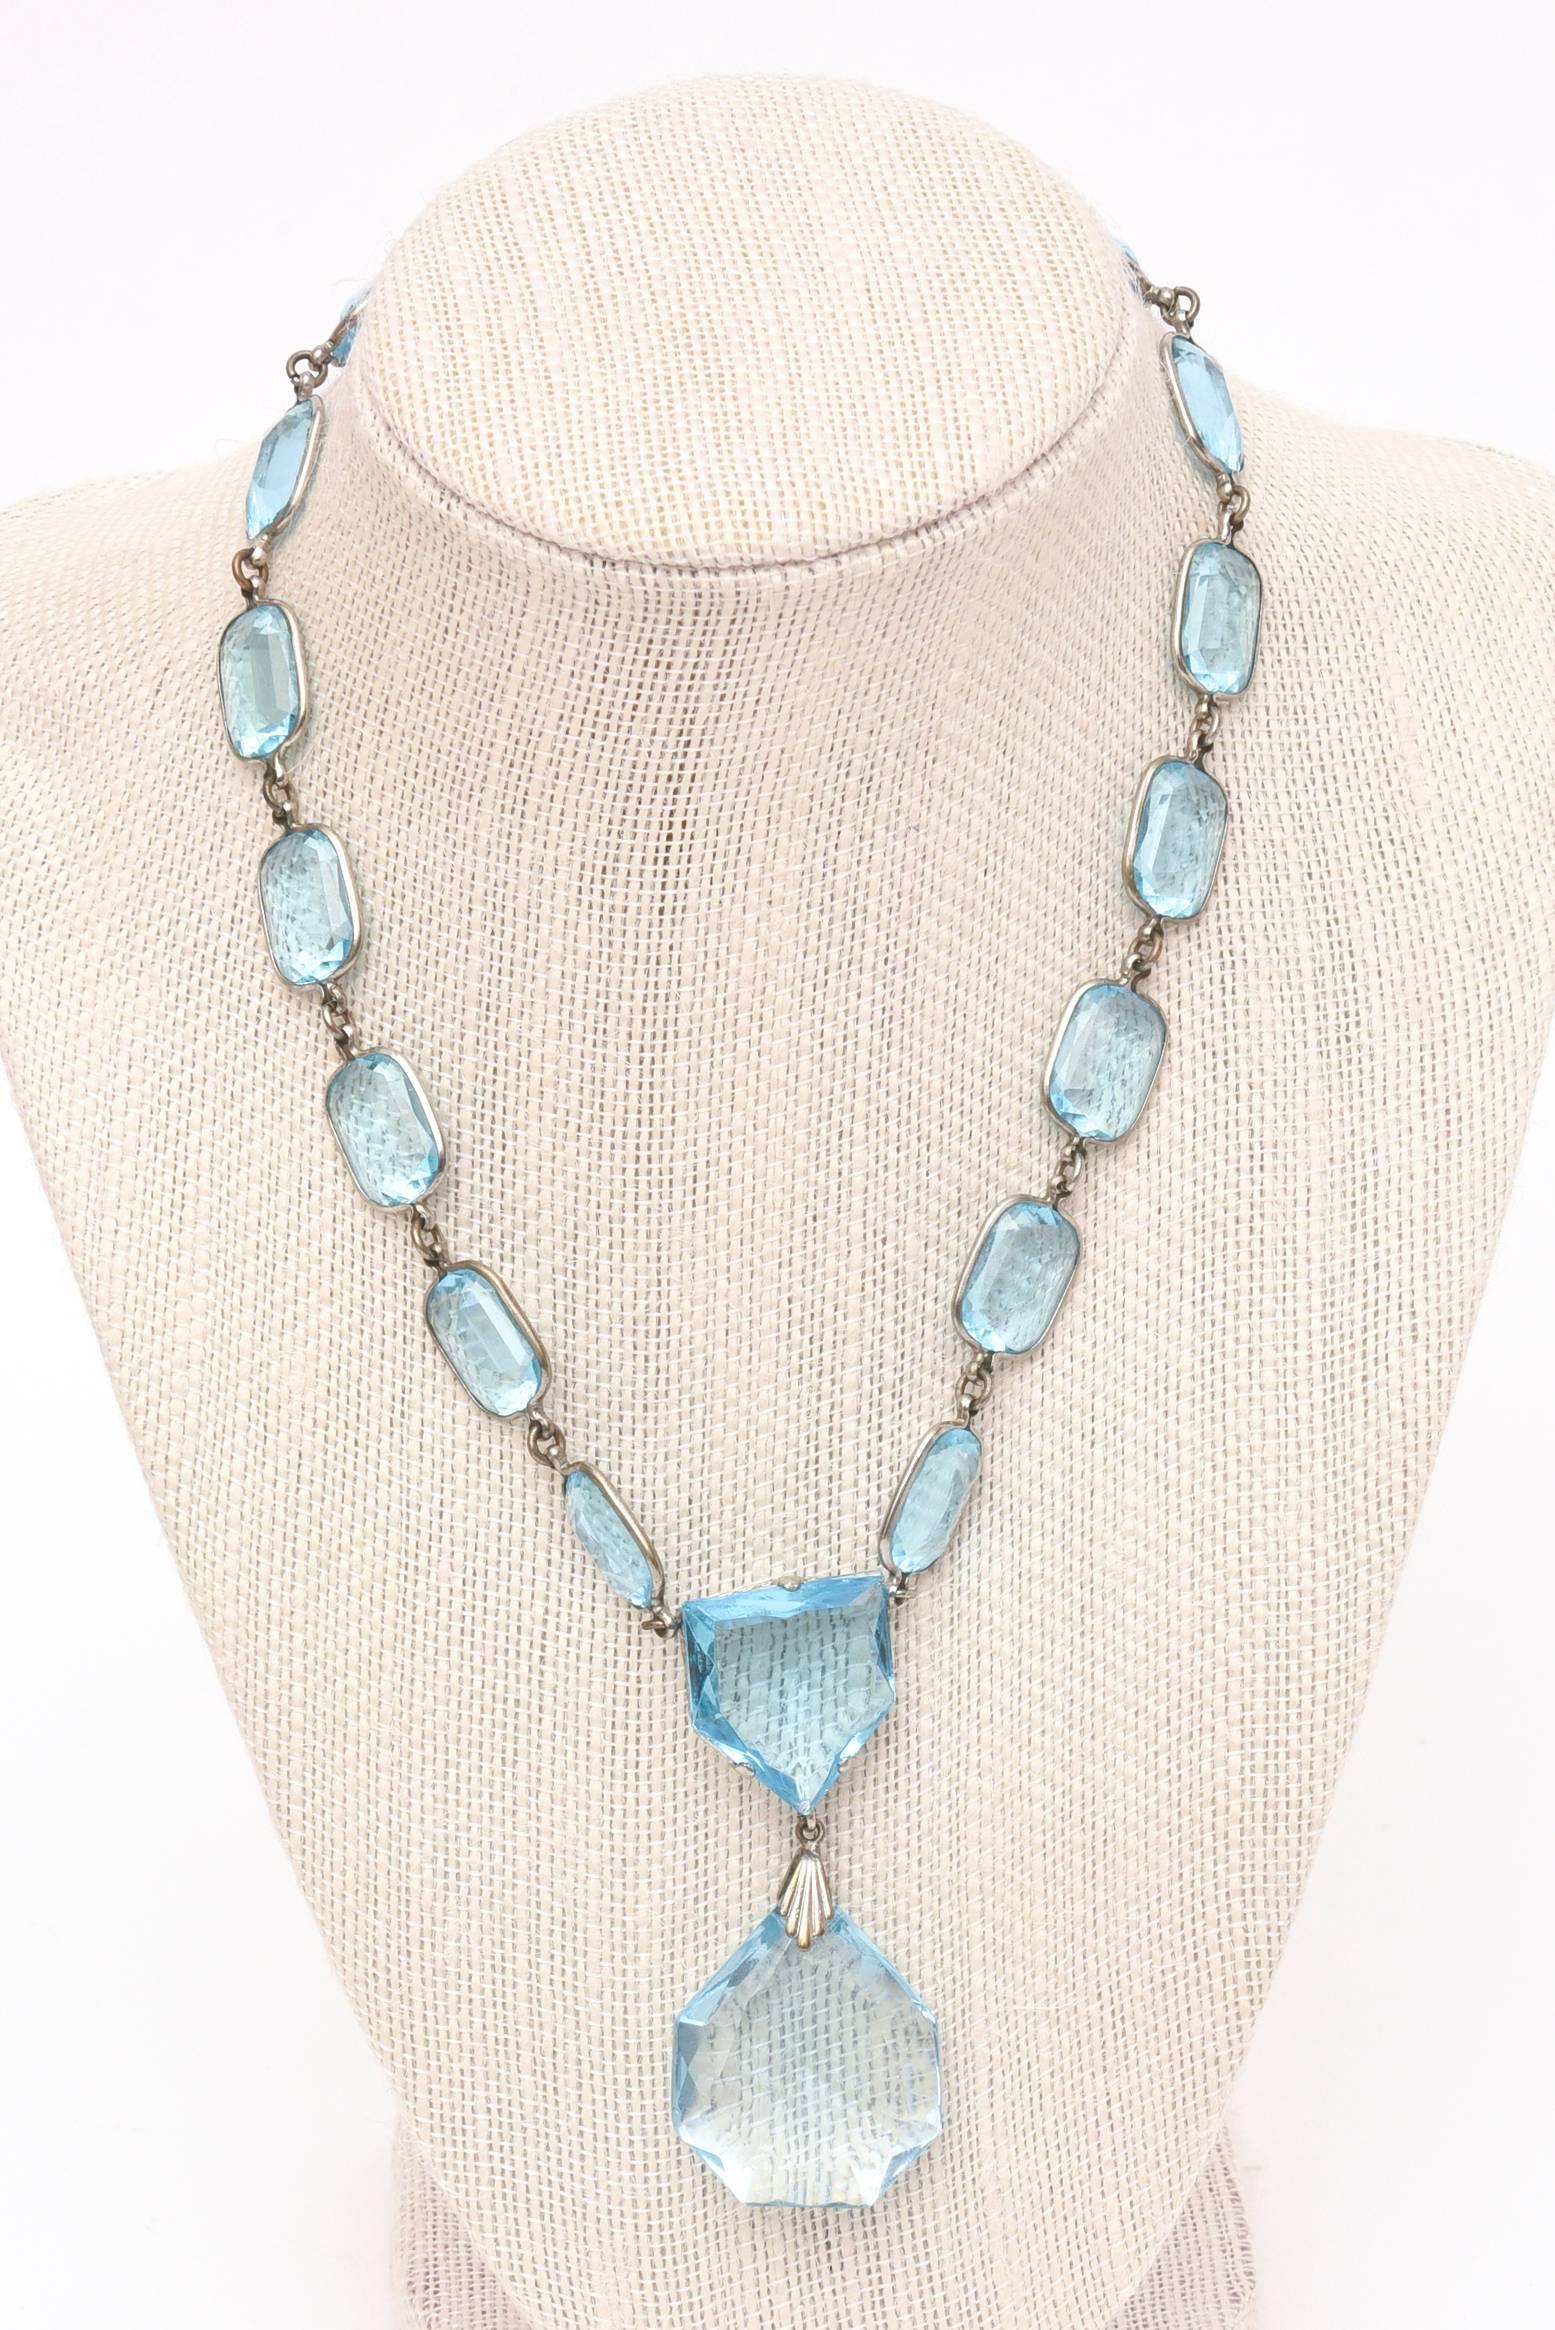 Faceted Glass Crystal Aquamarine/ Sterling Silver Pendant Necklace/ SALE 2